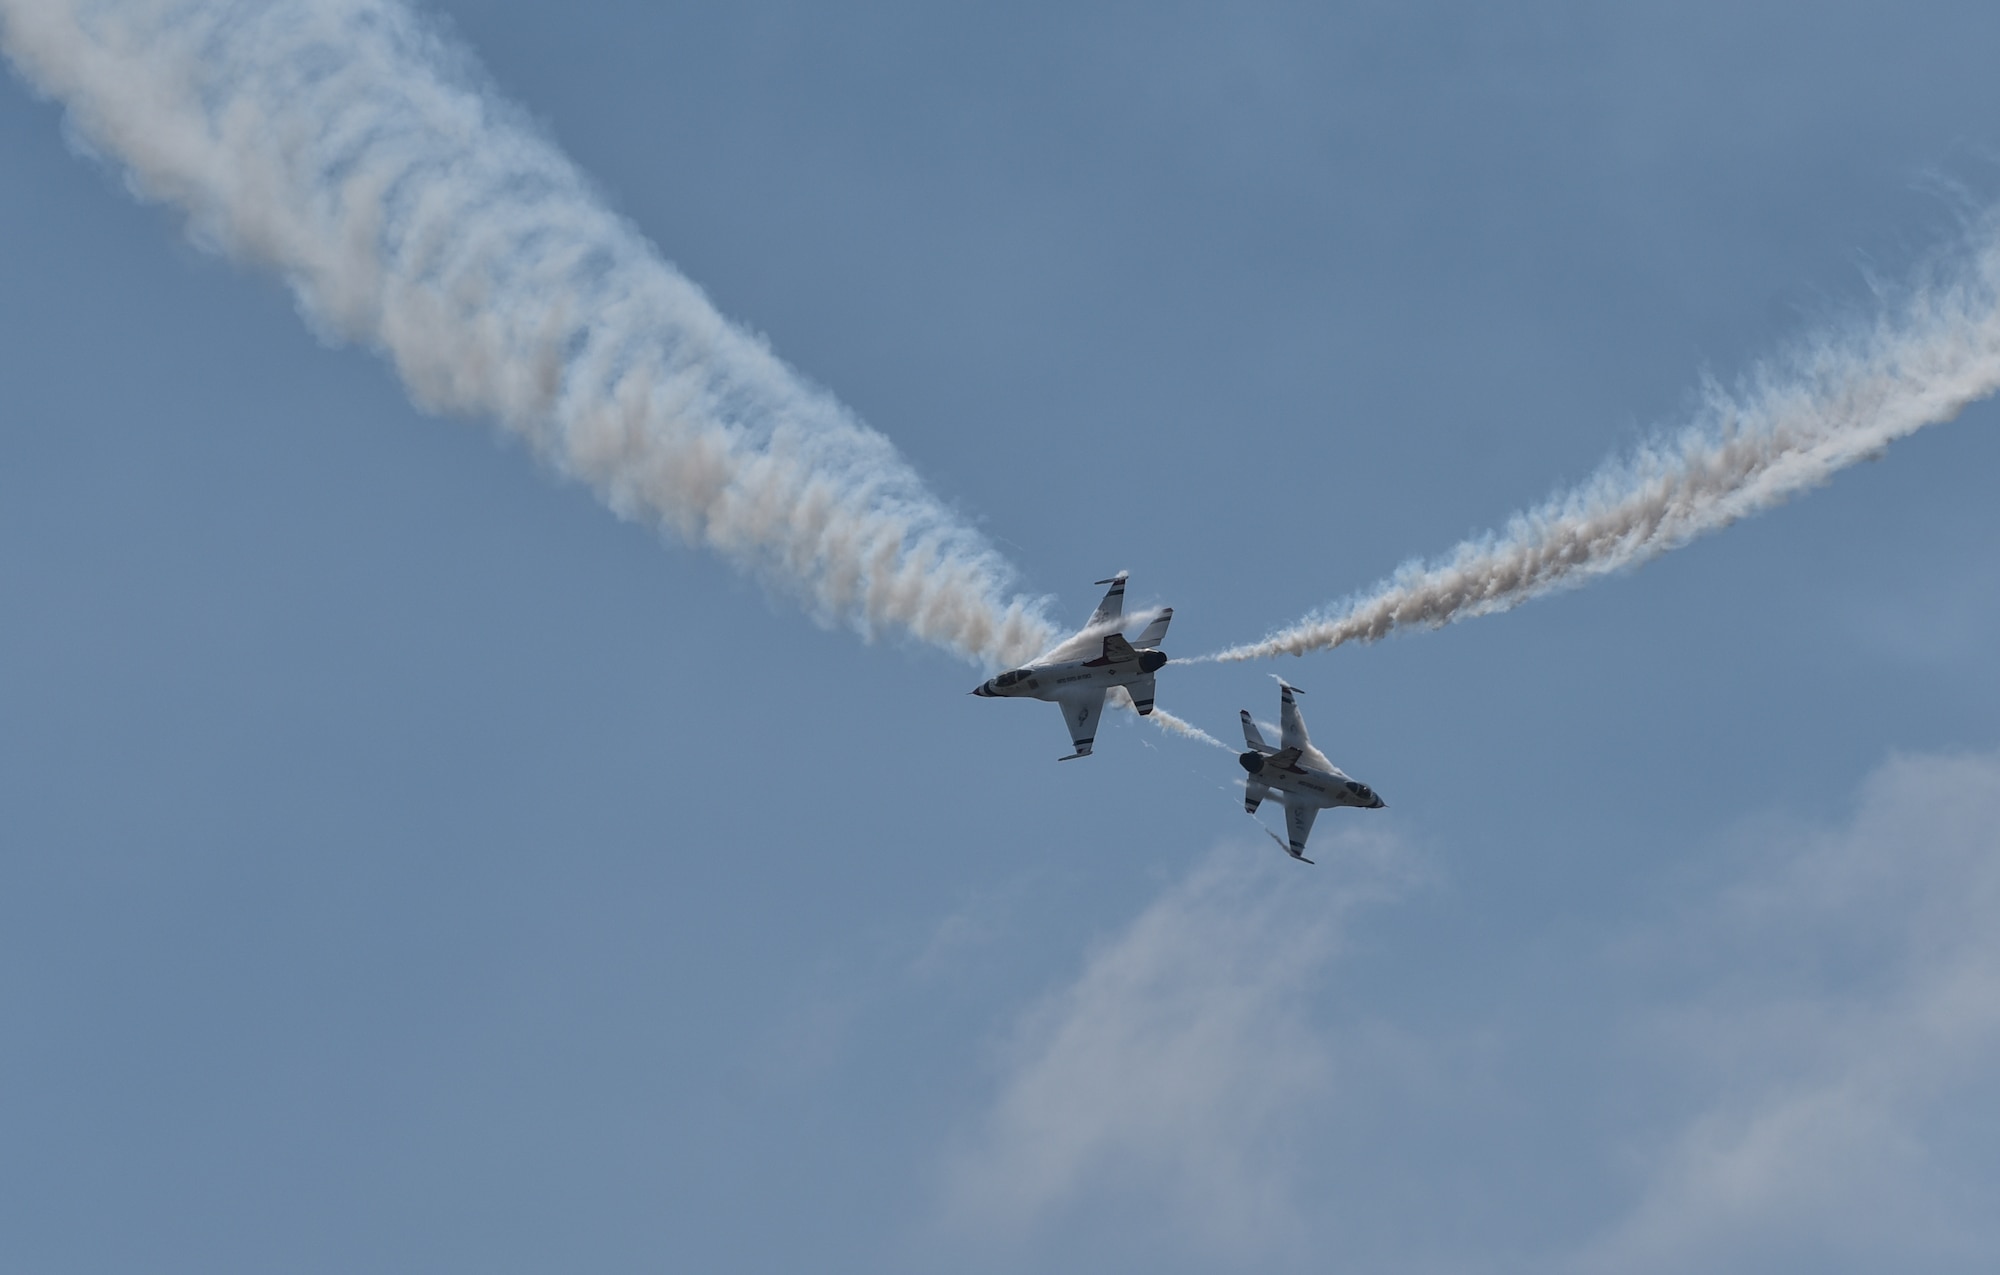 The U.S. Air Force Thunderbirds perform aerial acrobatics during Cheyenne Frontier Days in Cheyenne Wyo., July 25, 2018. The 3600th Air Demonstration unit, the official Air Force Air Demonstration team, was activated May 25, 1953. The unit adopted the name “Thunderbirds,” influenced in part by the strong Native American culture and folklore from the southwestern United States where Luke Air Force Base, Arizona, is located. The airshow provides a chance for the local community and worldwide visitors of CFD to see the U.S. Air Force in action over the skies of Cheyenne. (U.S. Air Force photo by Airman 1st Class Braydon Williams)